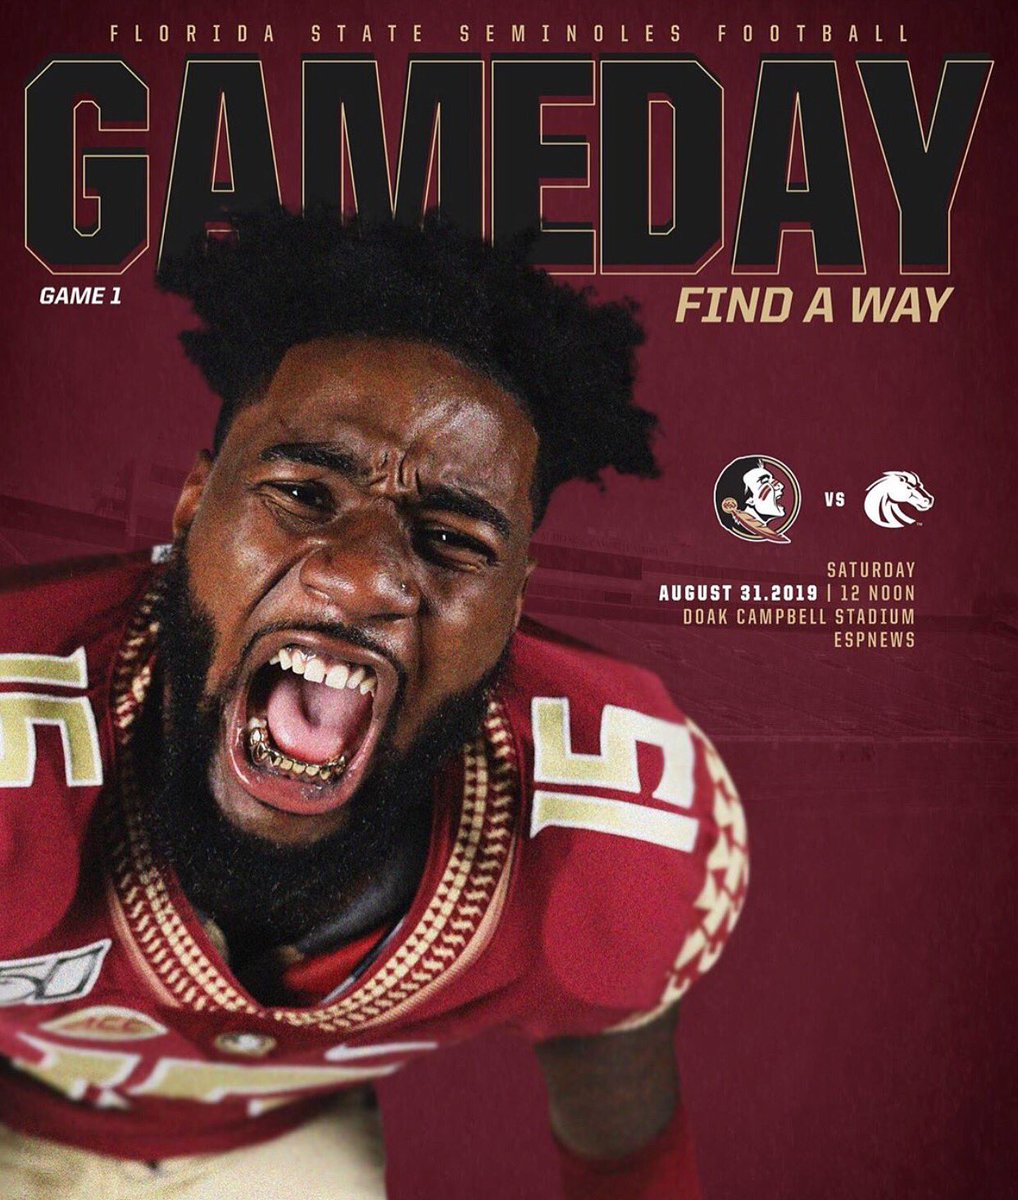 #CollegeFootball is back, #FloridaStateSeminoles vs #BoiseBroncos Today, let’s go get that #SeasonOpener #Seminoles, #SeminoleGang #FSU #FloridaState #TomahawkChop #ACC